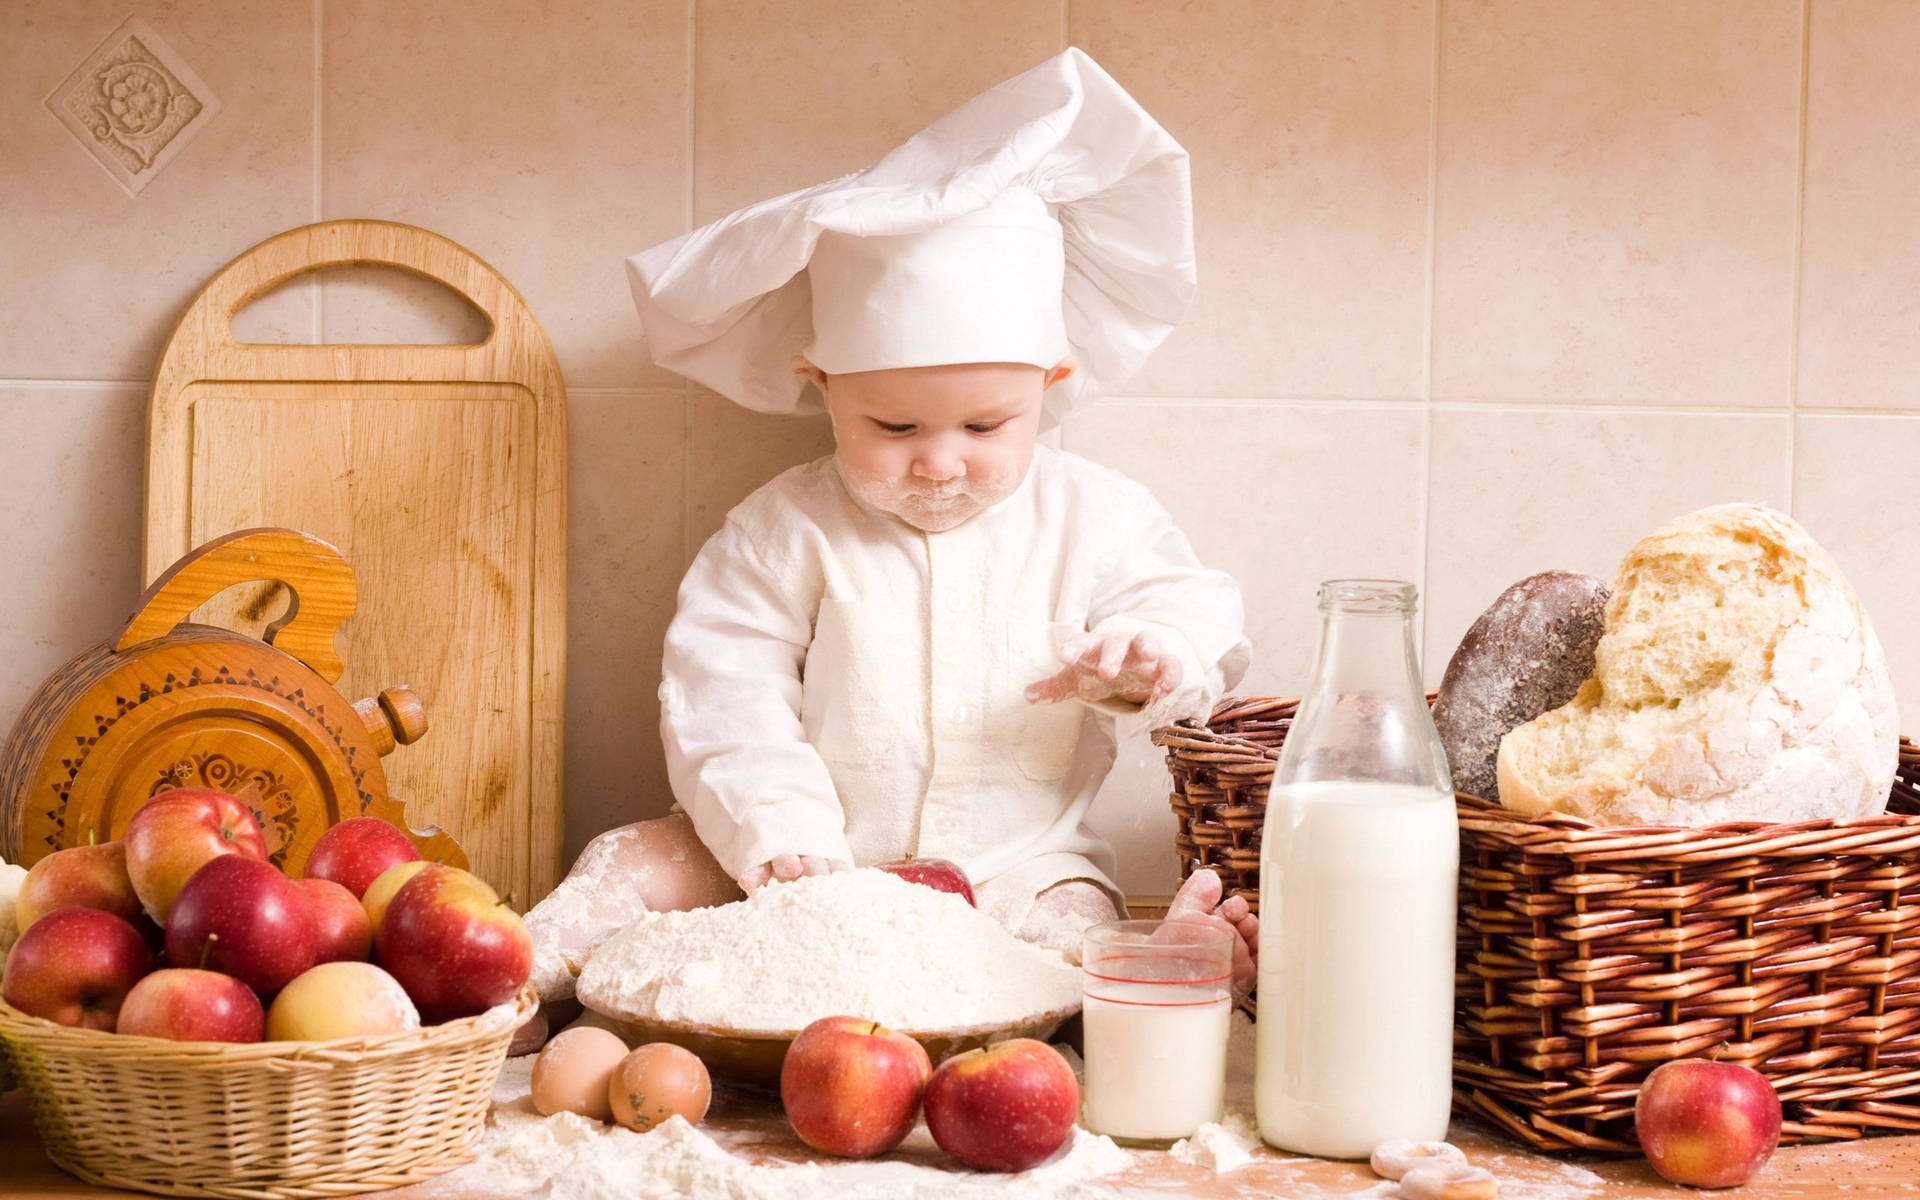 Adorable Cooking Baby Wallpaper